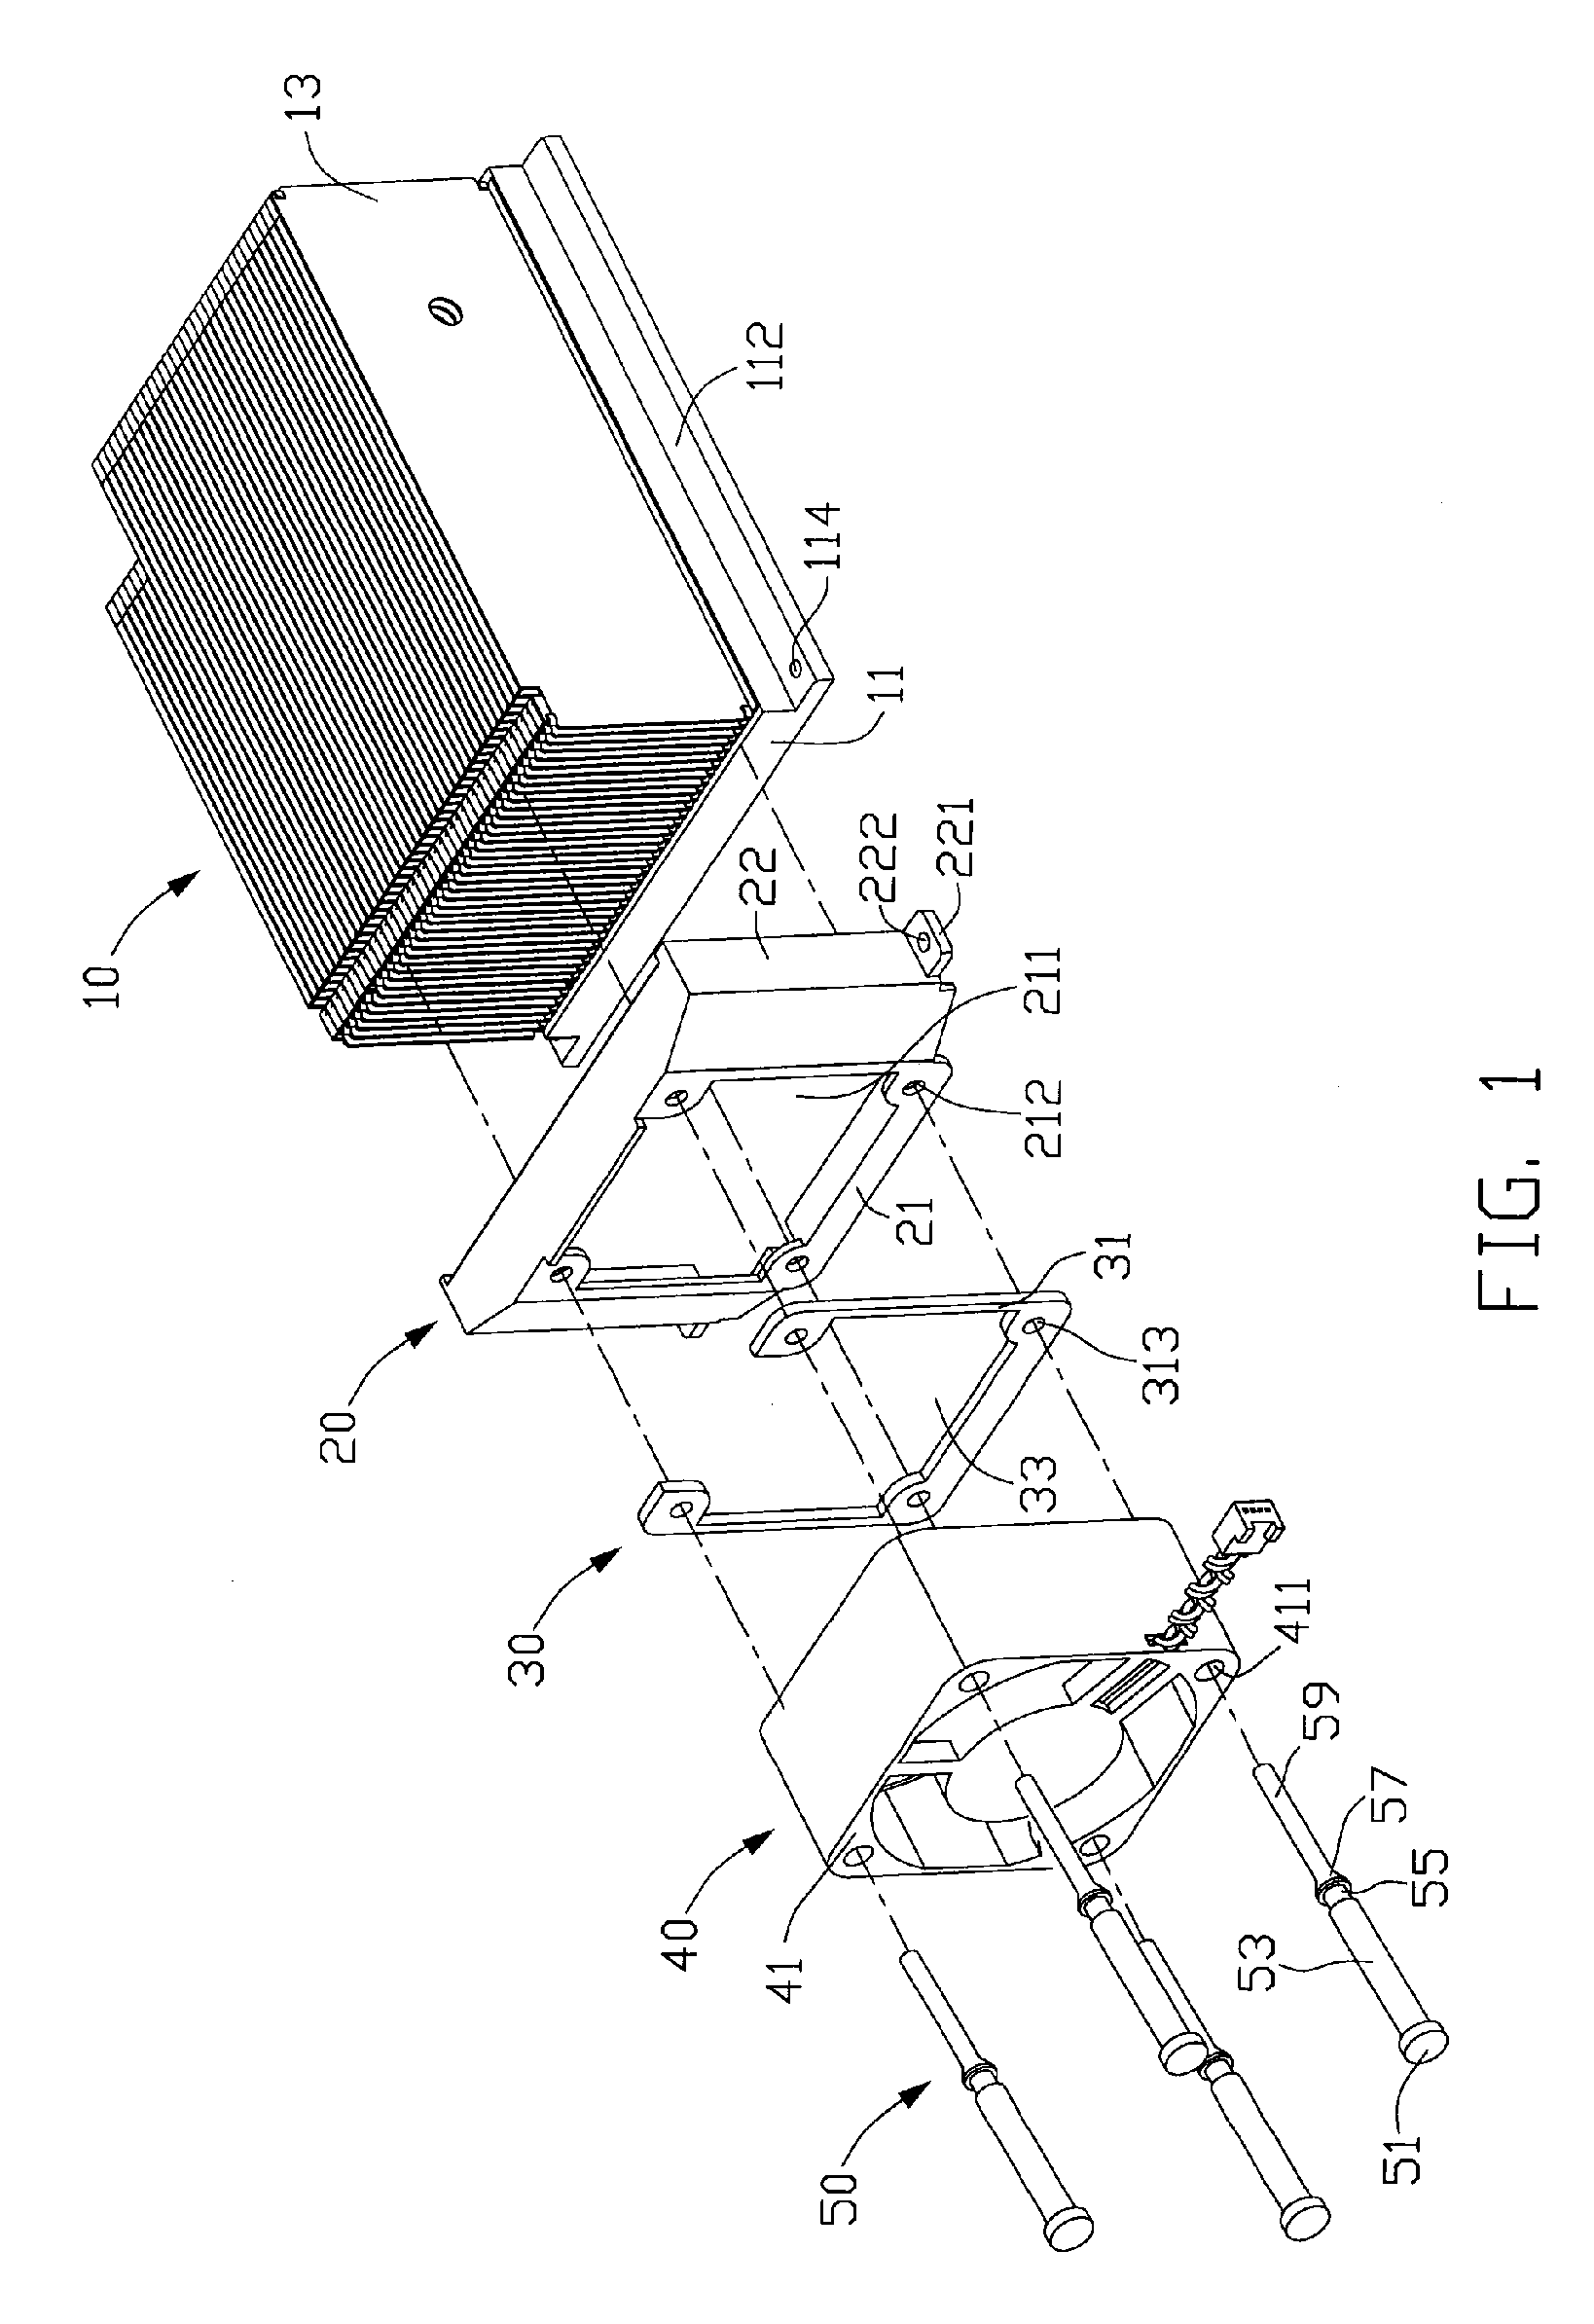 Fan fastener for fastening a fan to a heat sink and method of using the same